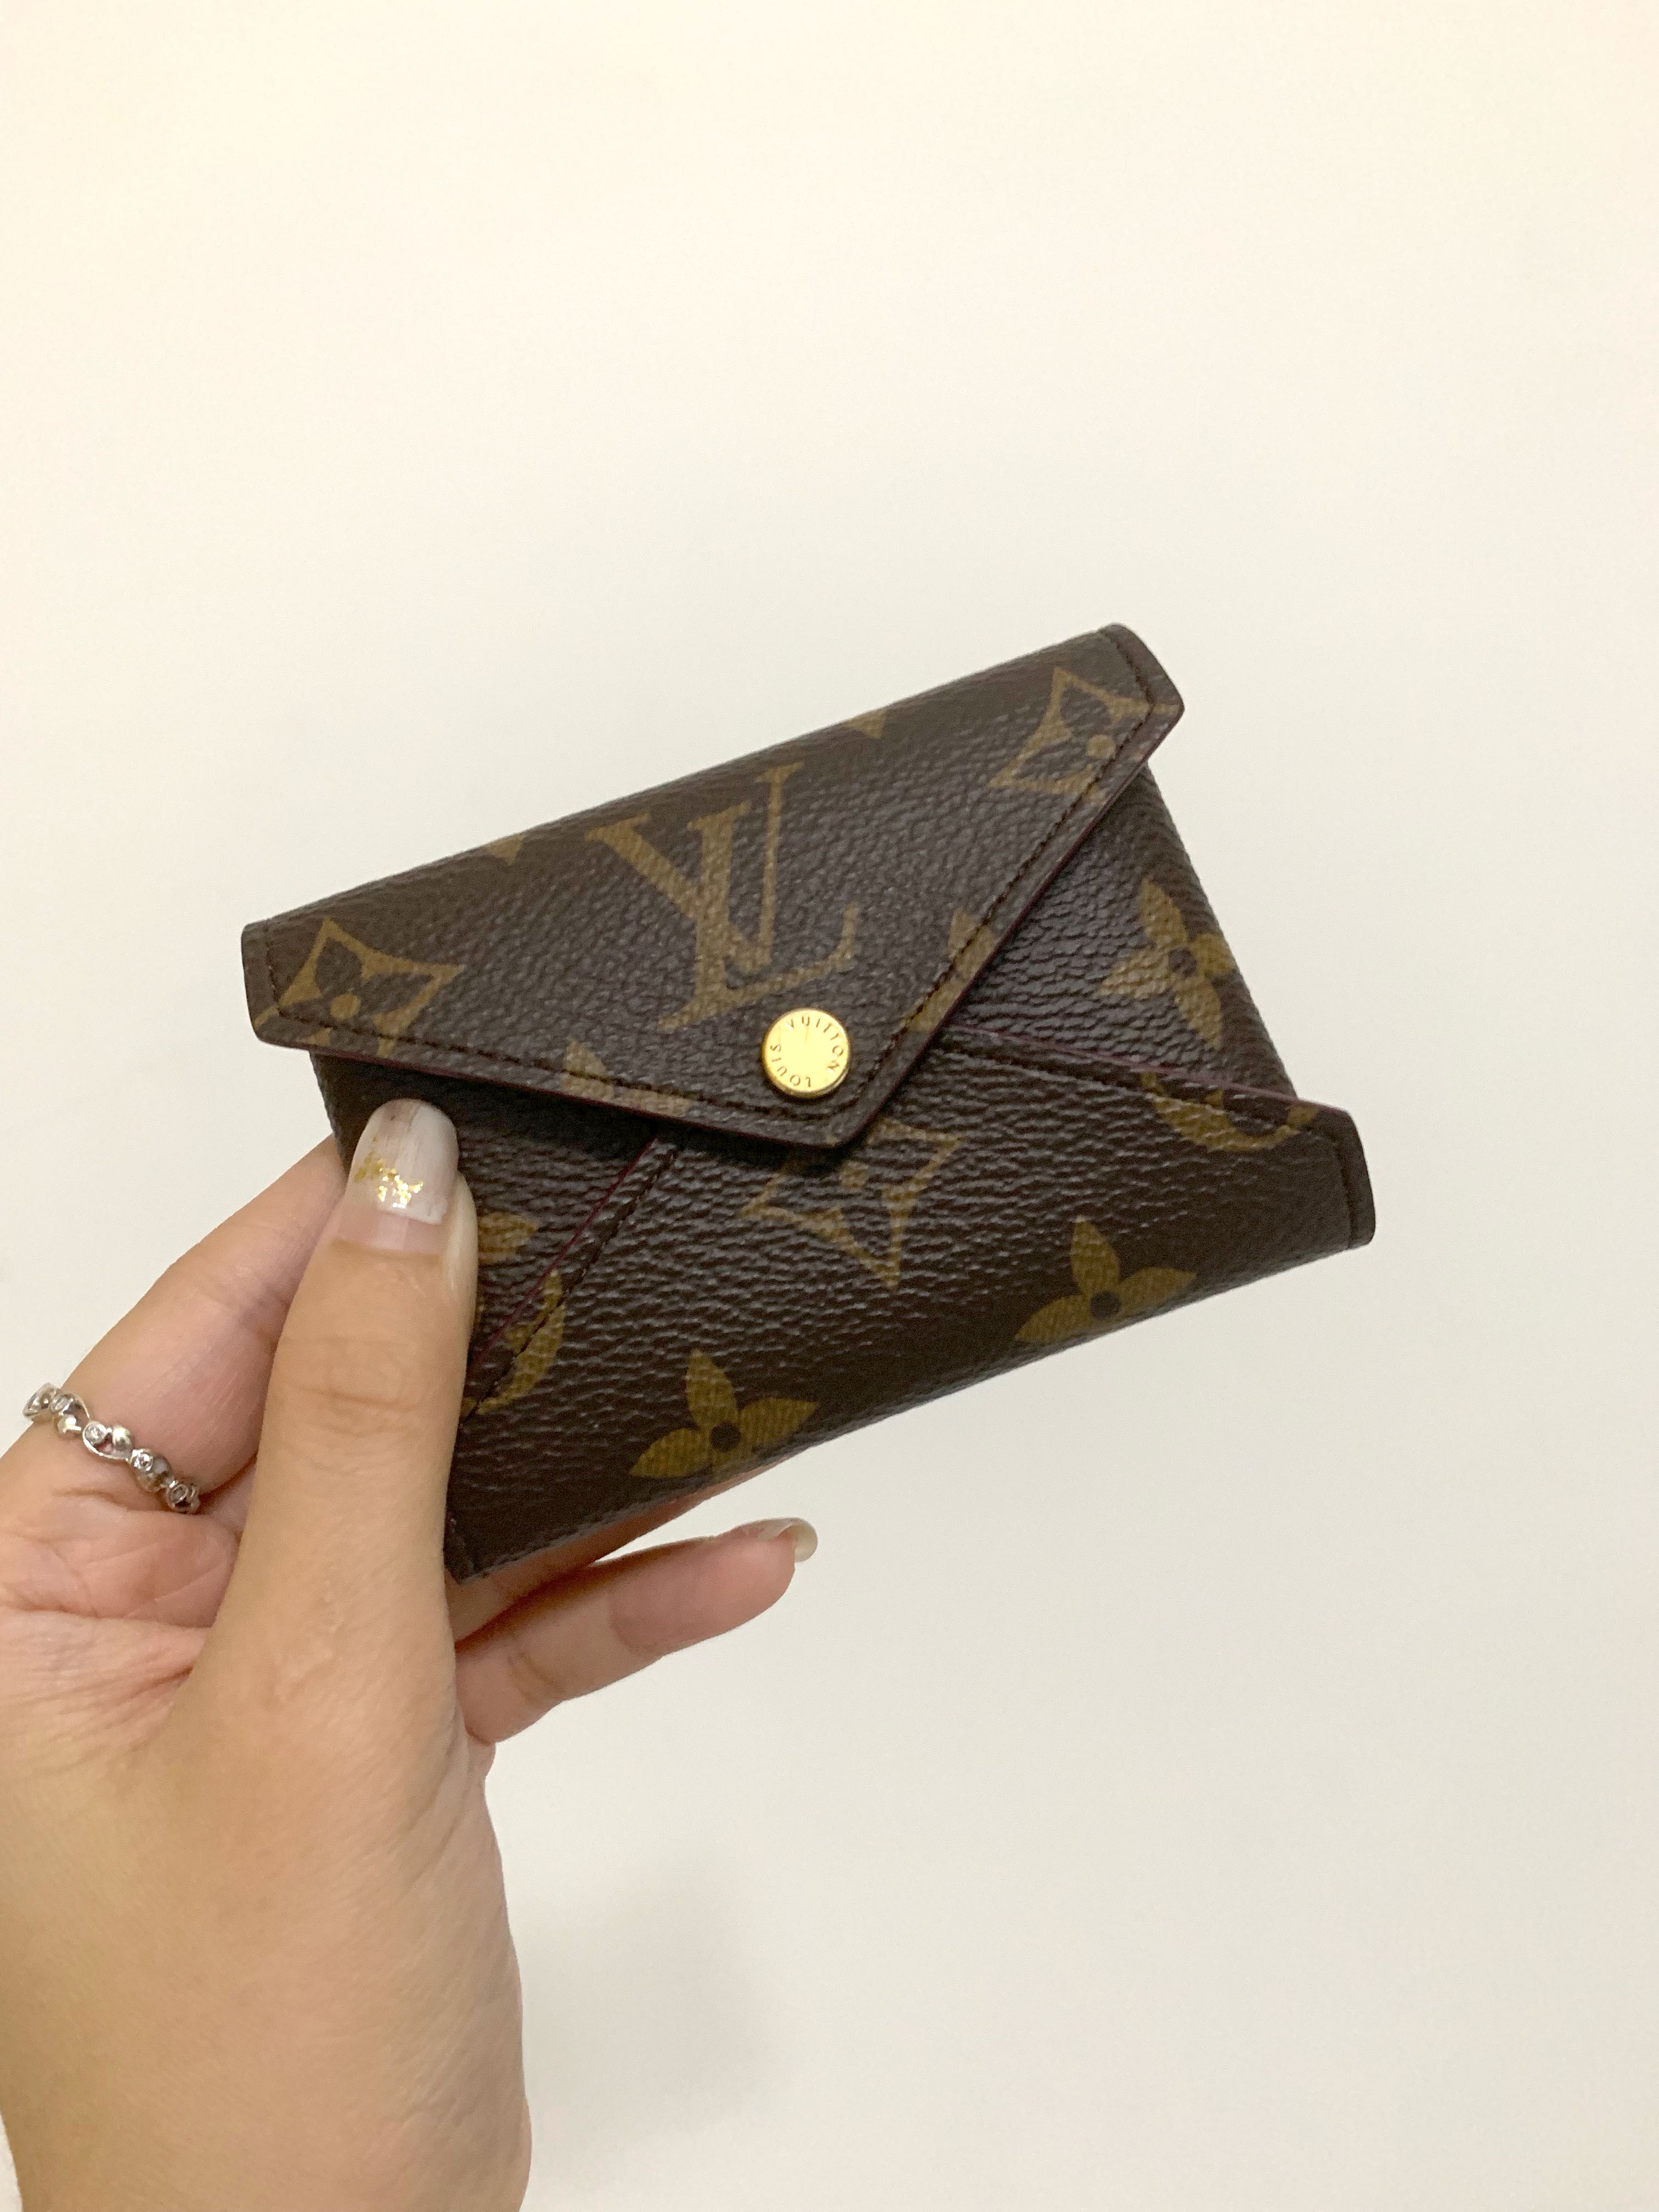 ✨Gently used kirigami pochette. In great condition - minor scuff